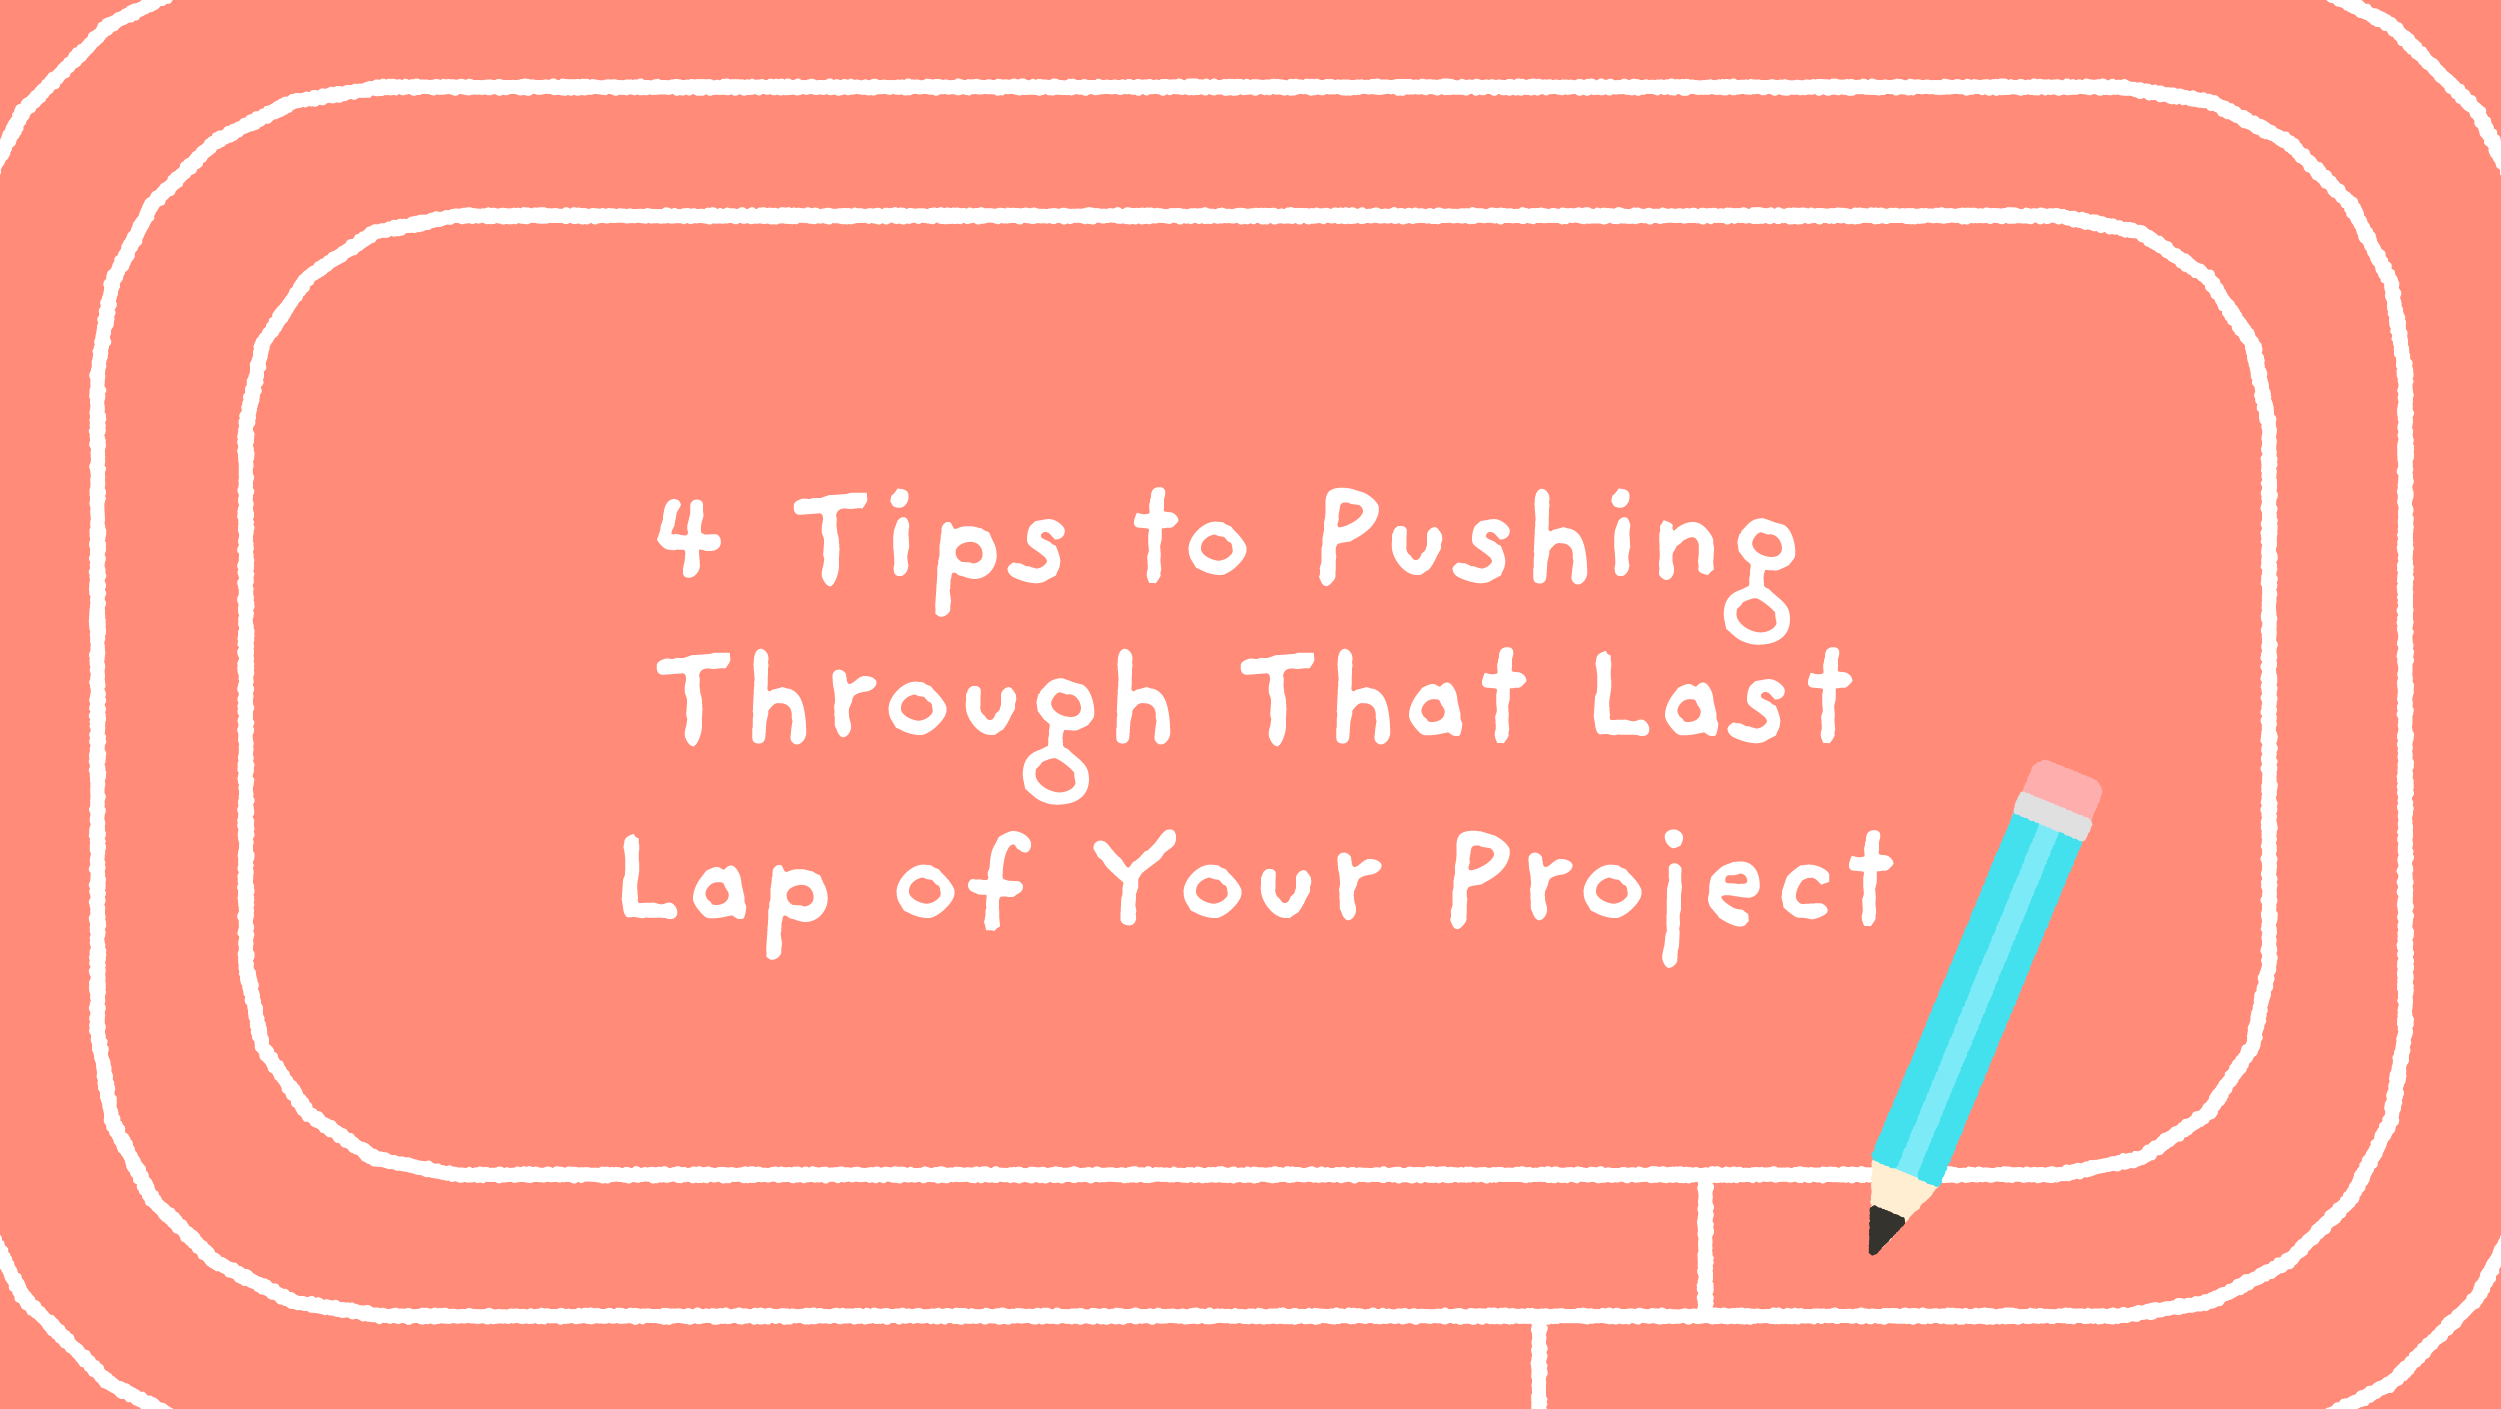 4 Tips to Pushing Through That Last Lap of Your Project